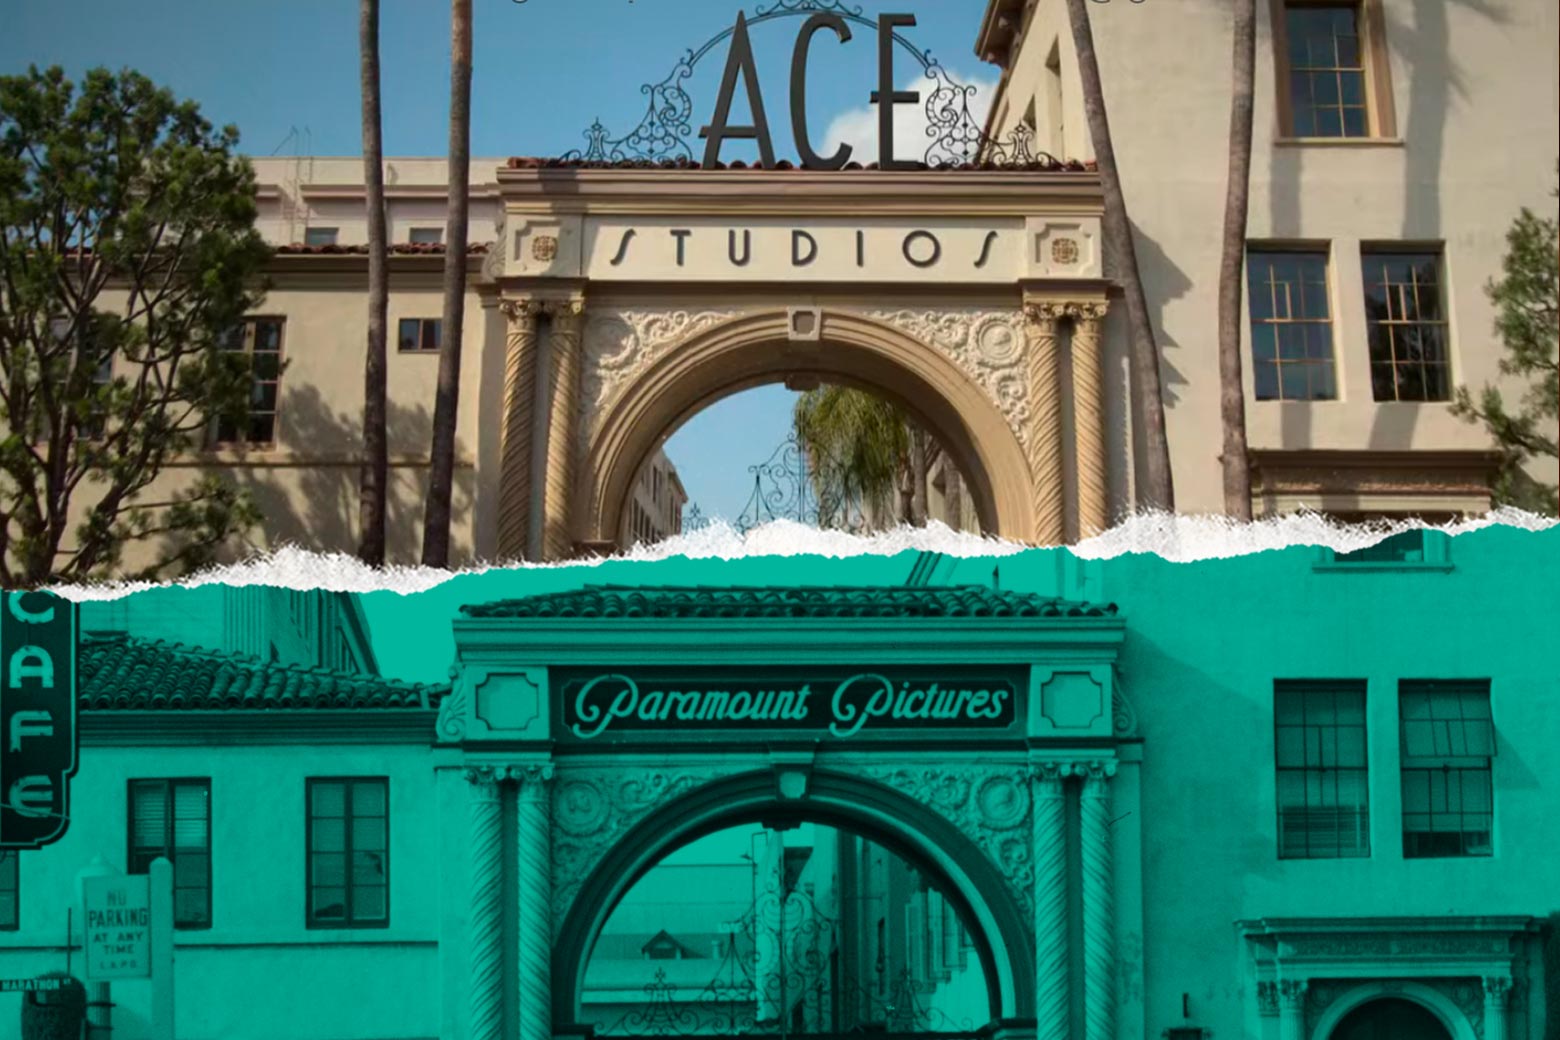 The gates with signs that say Ace Studios and Paramount Pictures.